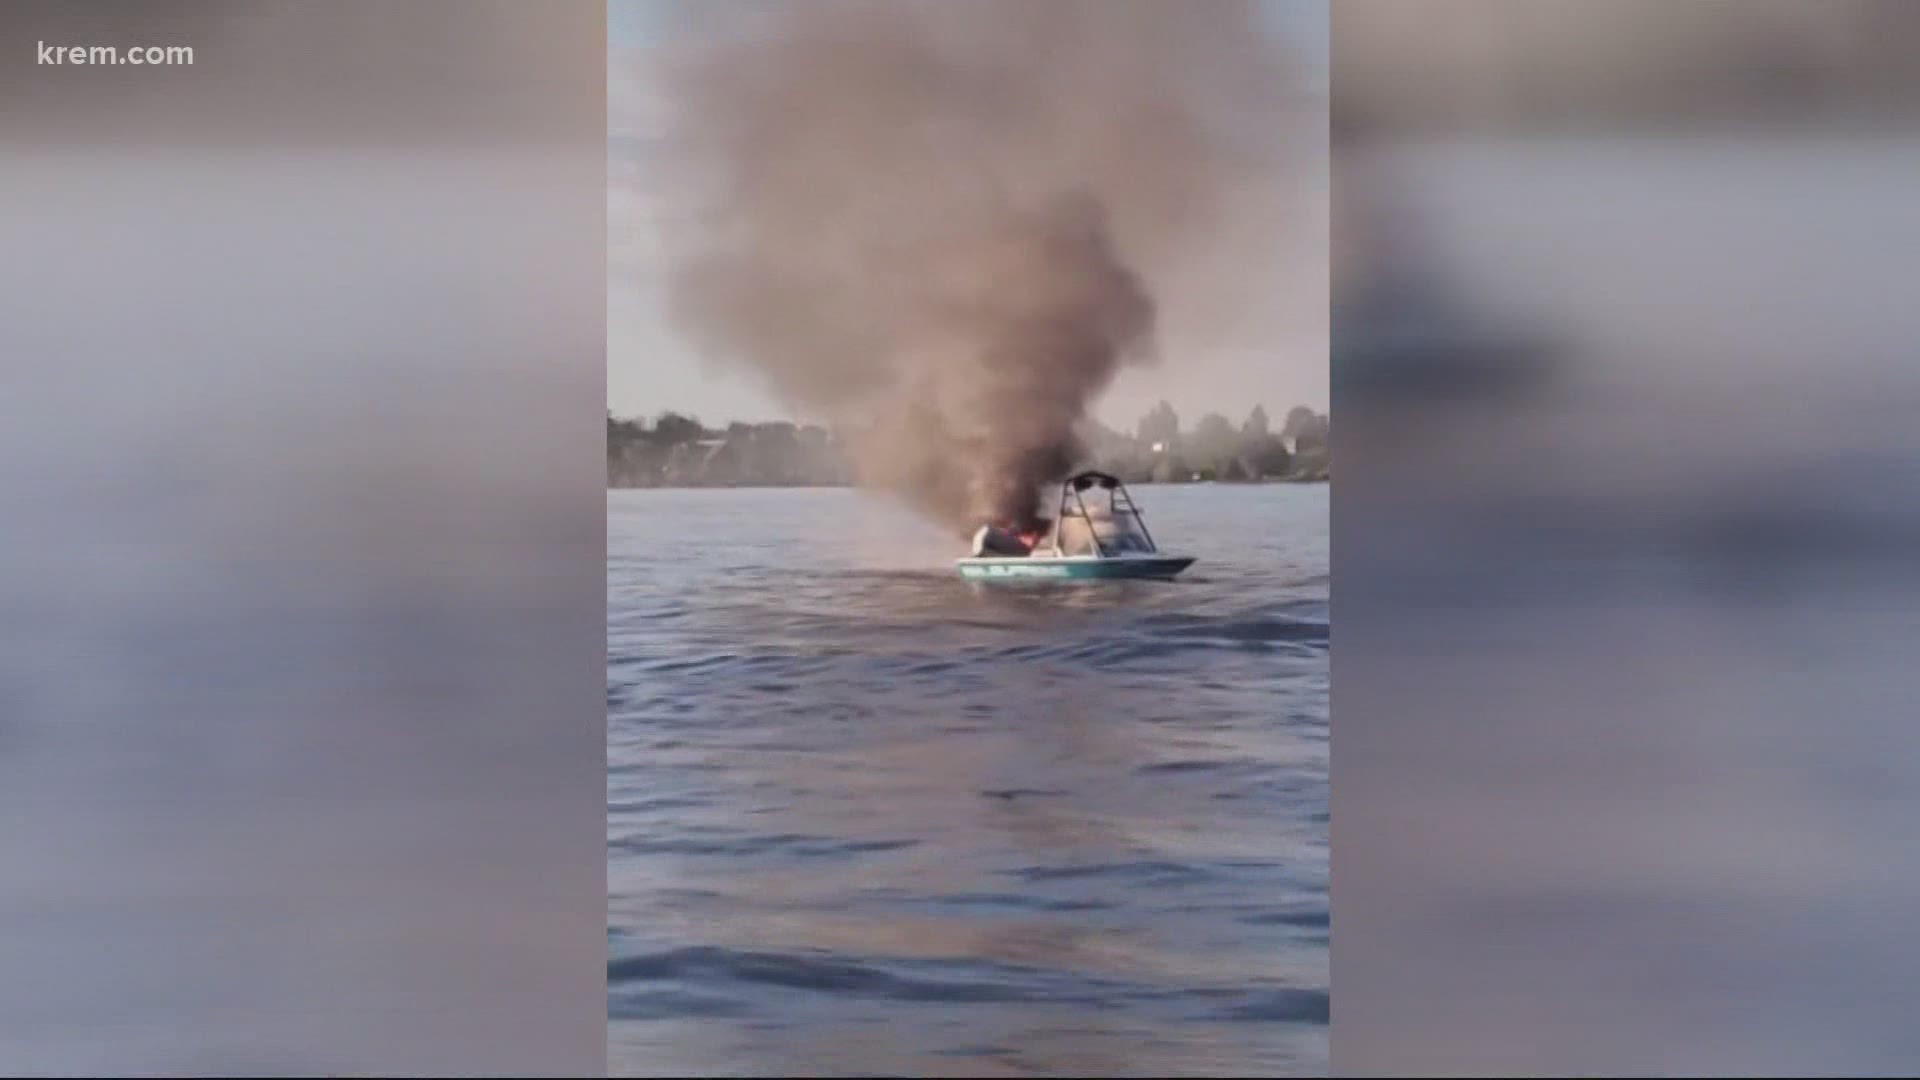 Those in the boat that caught fire sustained minor burn injuries and refused medical treatment.